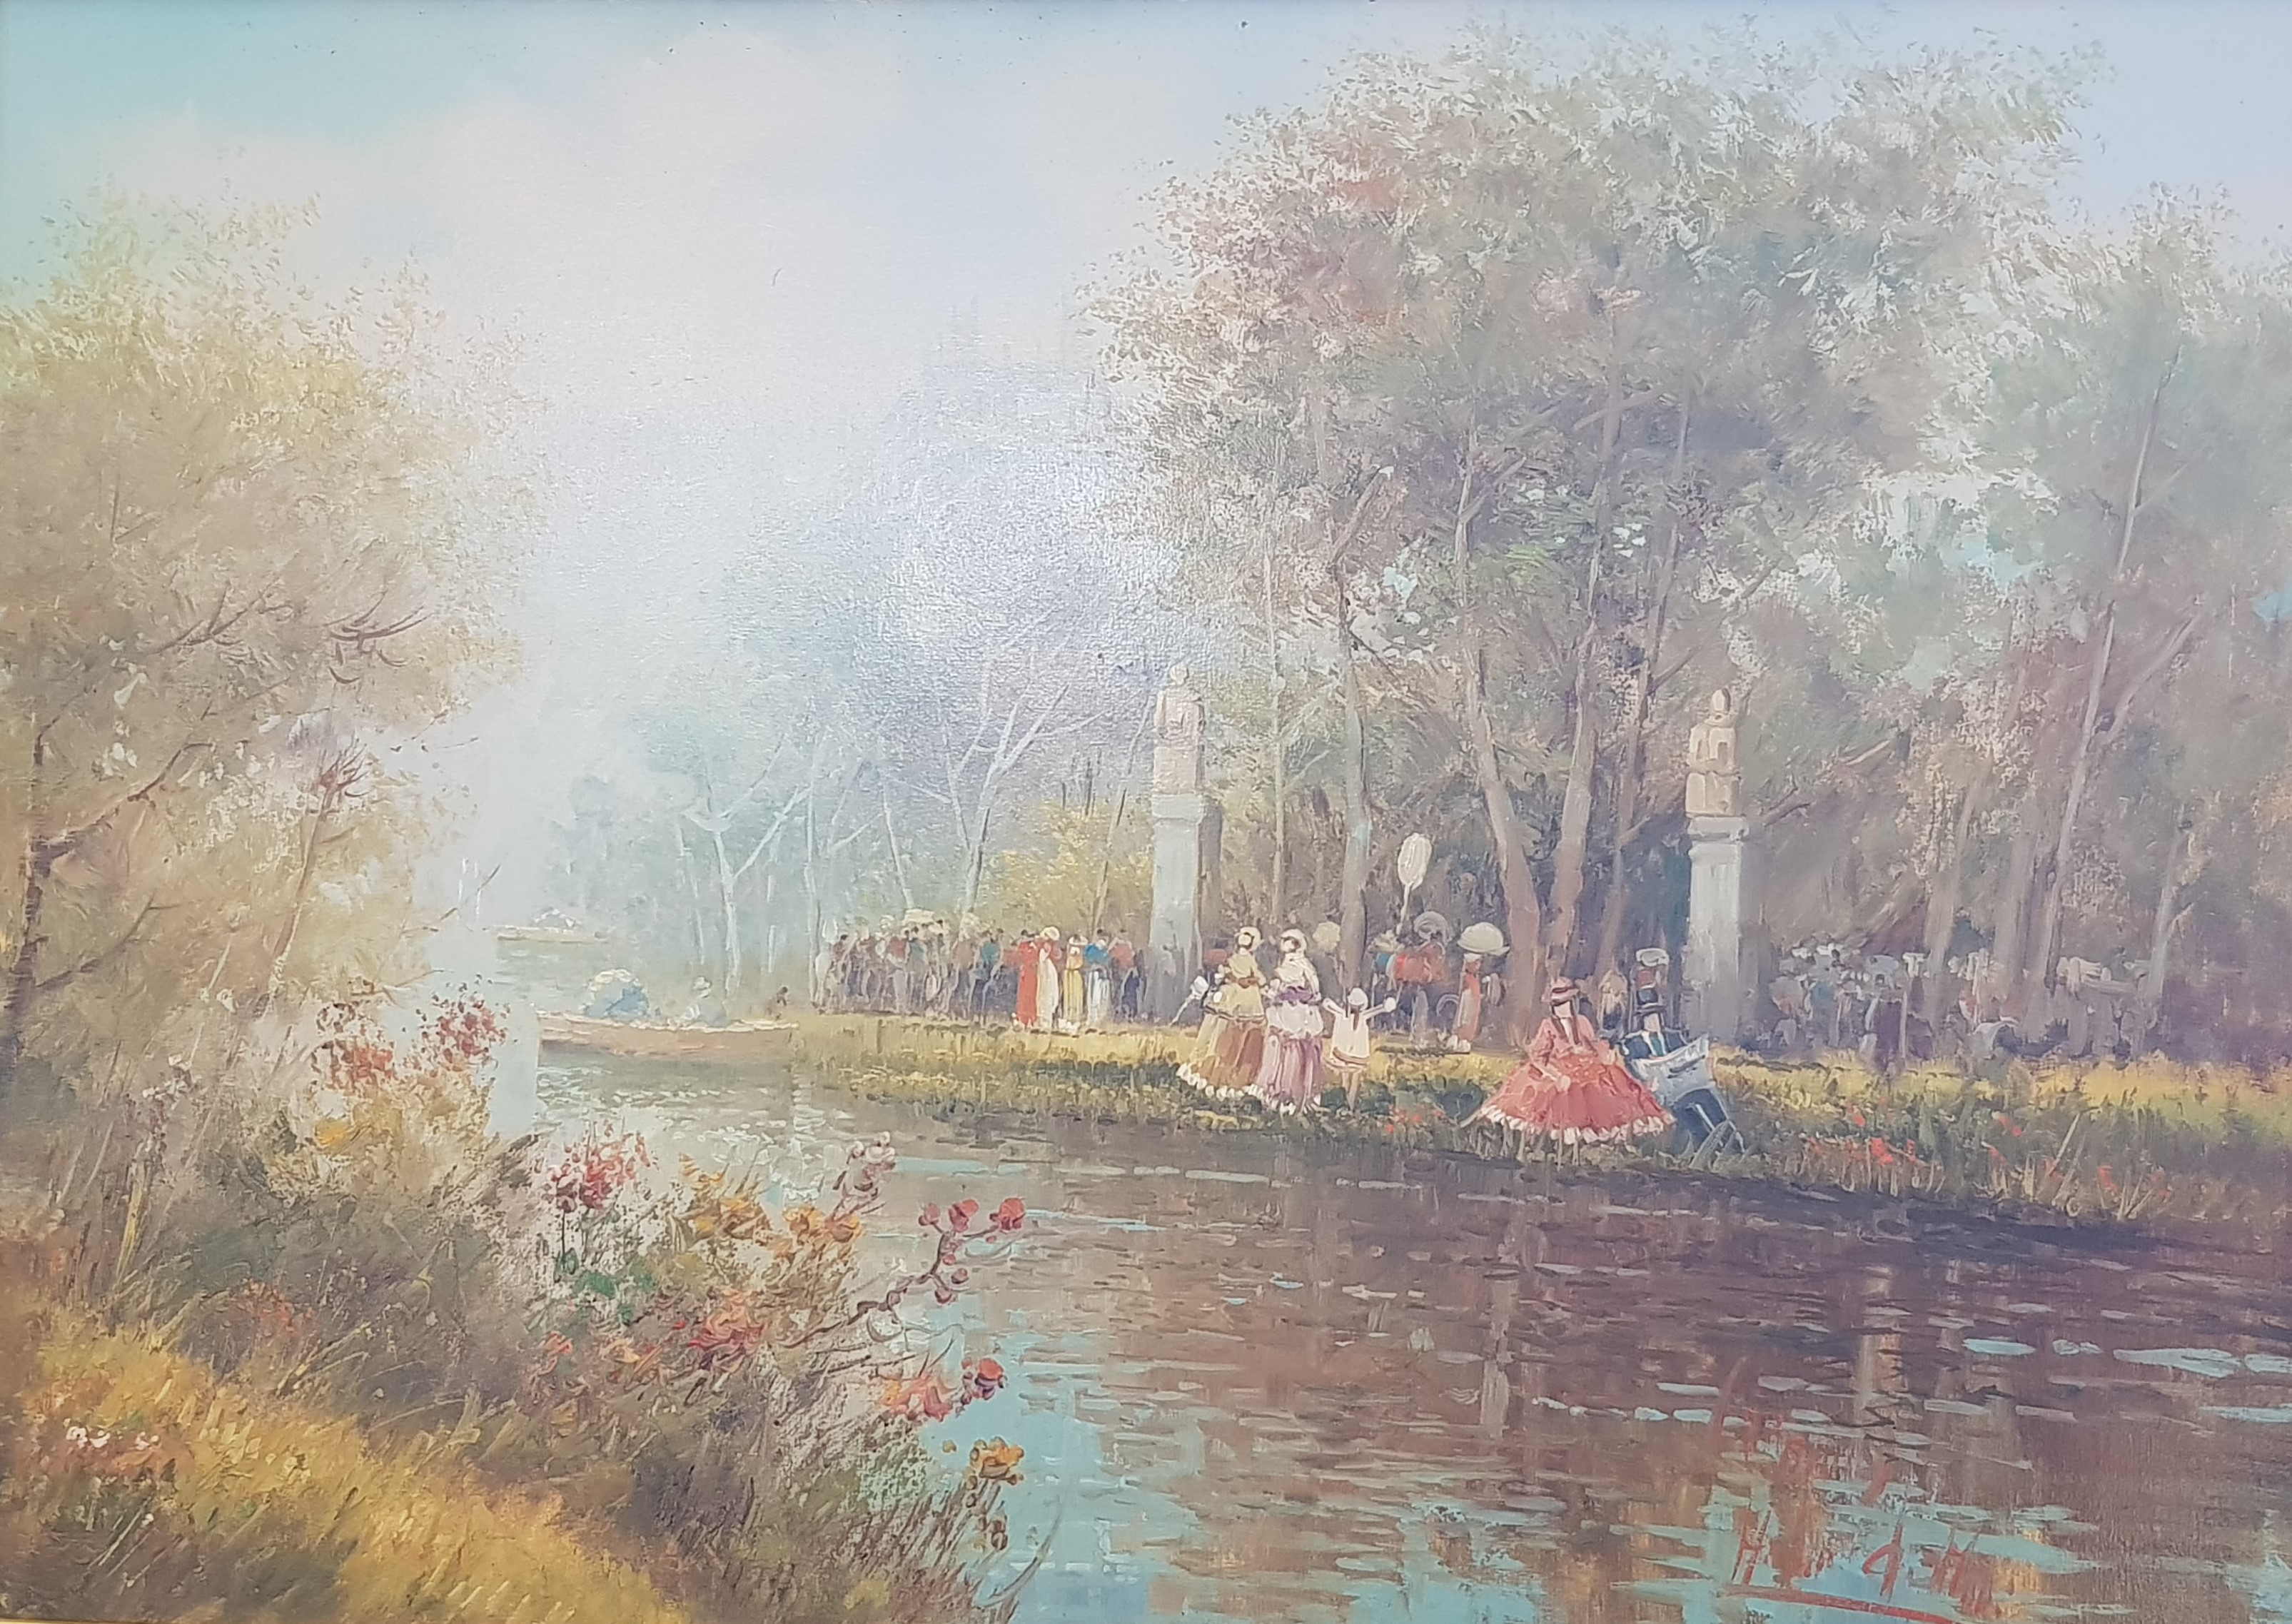 DI MEO. Framed, unglazed, signed early 20th century oil on canvas, villagers beside river, with